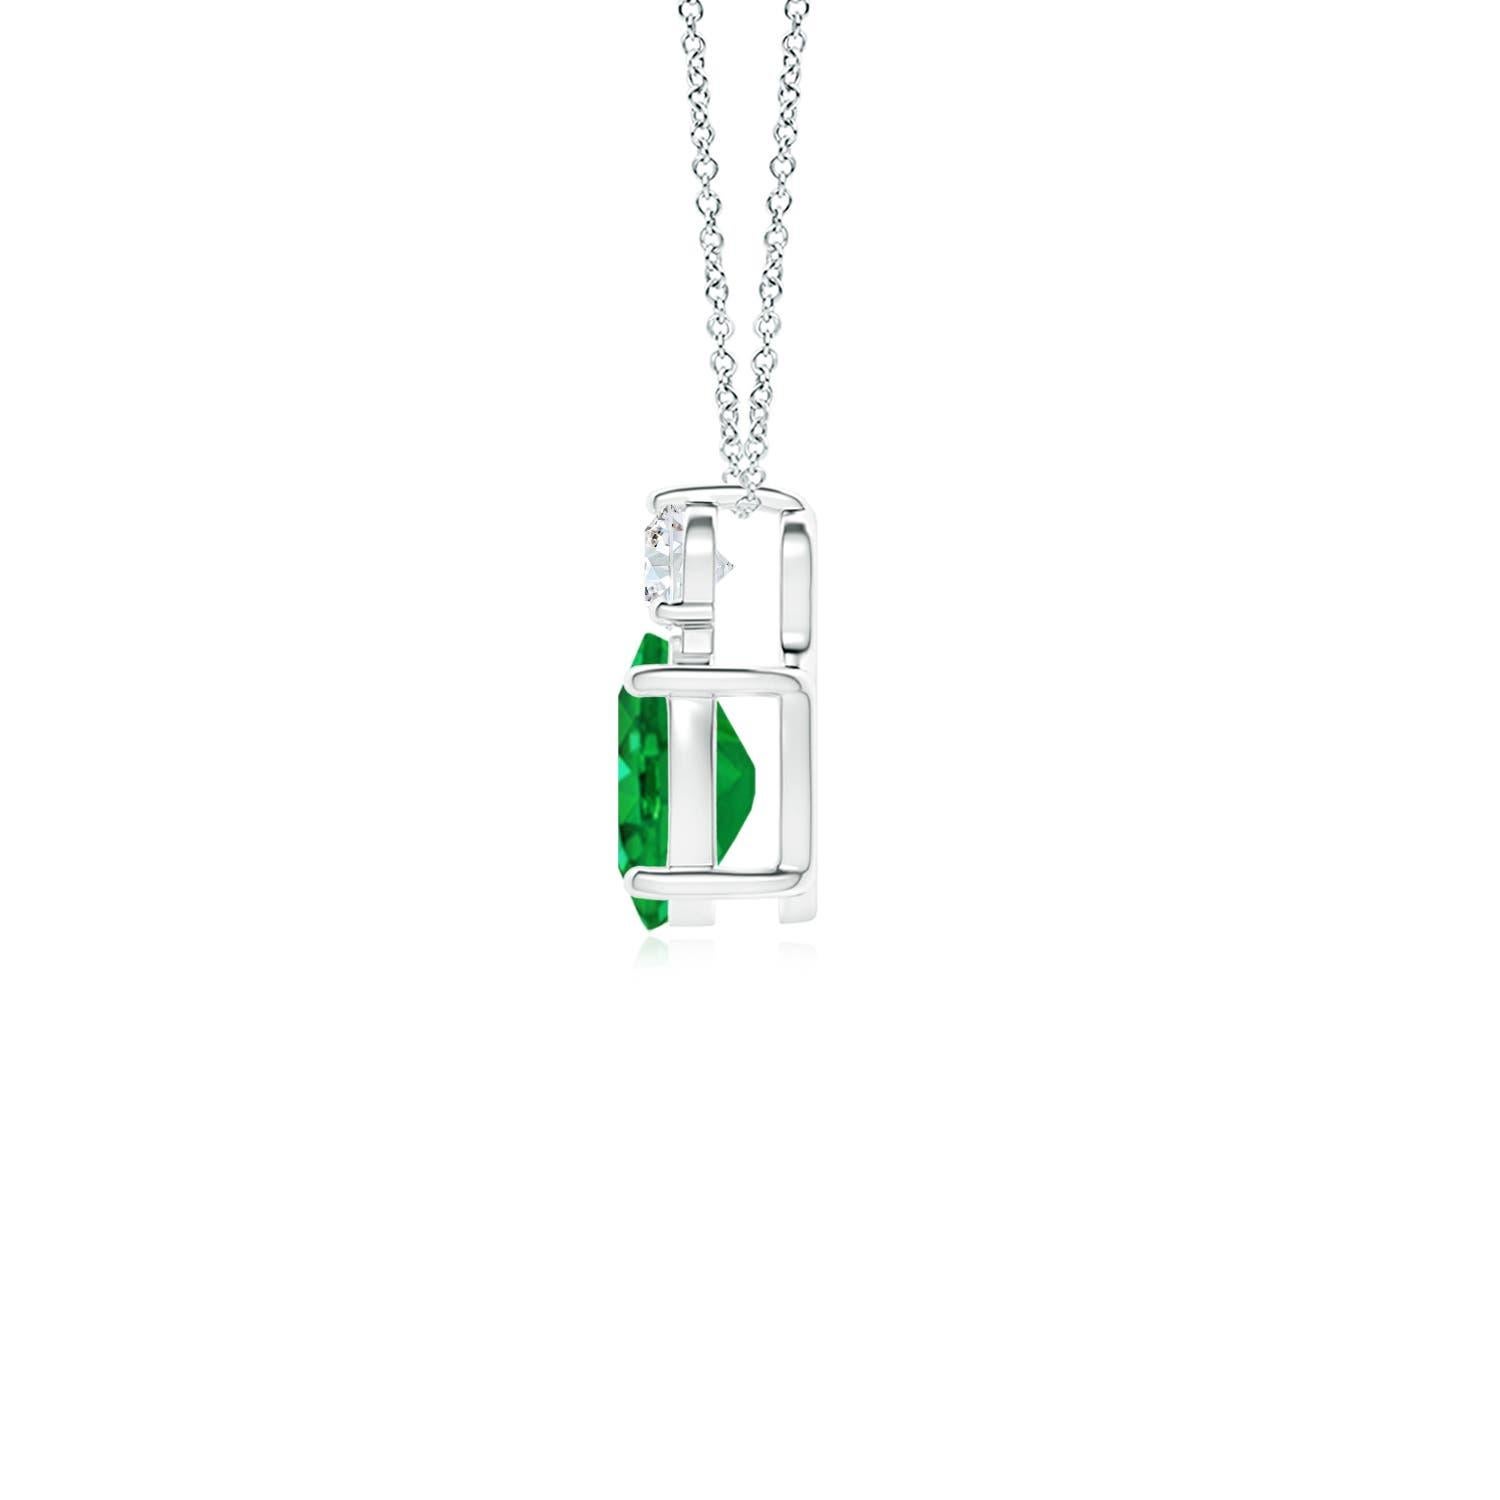 Crafted in 14k white gold, this classic solitaire emerald pendant personifies elegance. The rich green oval emerald is topped by a sparkling diamond for added allure. The intricate scroll work on the sides enhances this prong set emerald pendant's